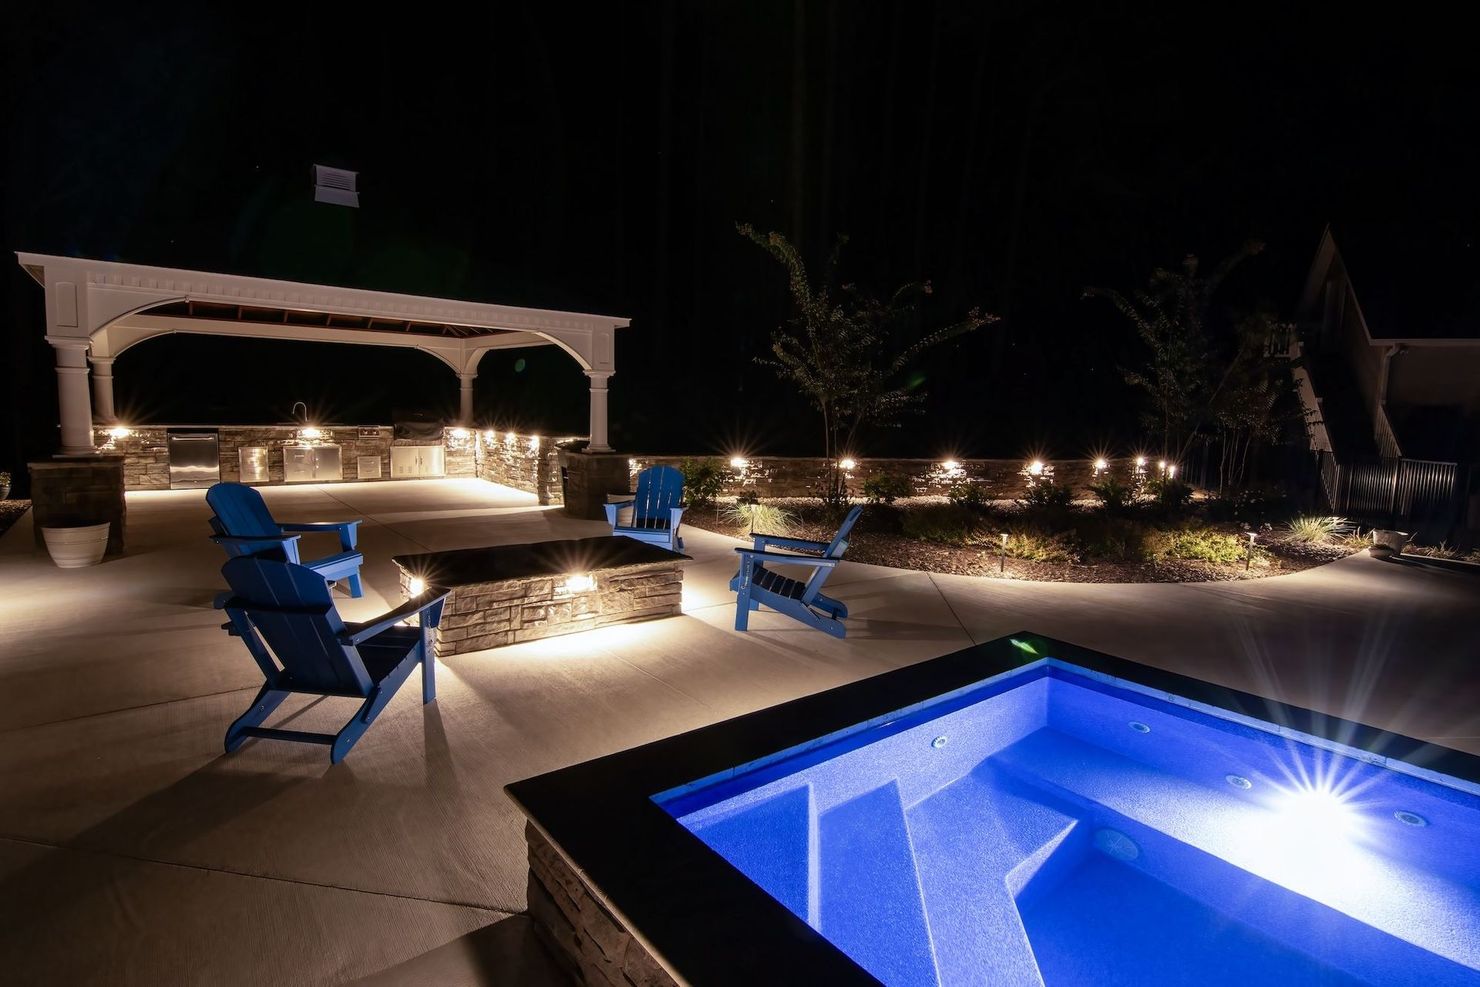 A patio with a gazebo , chairs , and a pool at night.